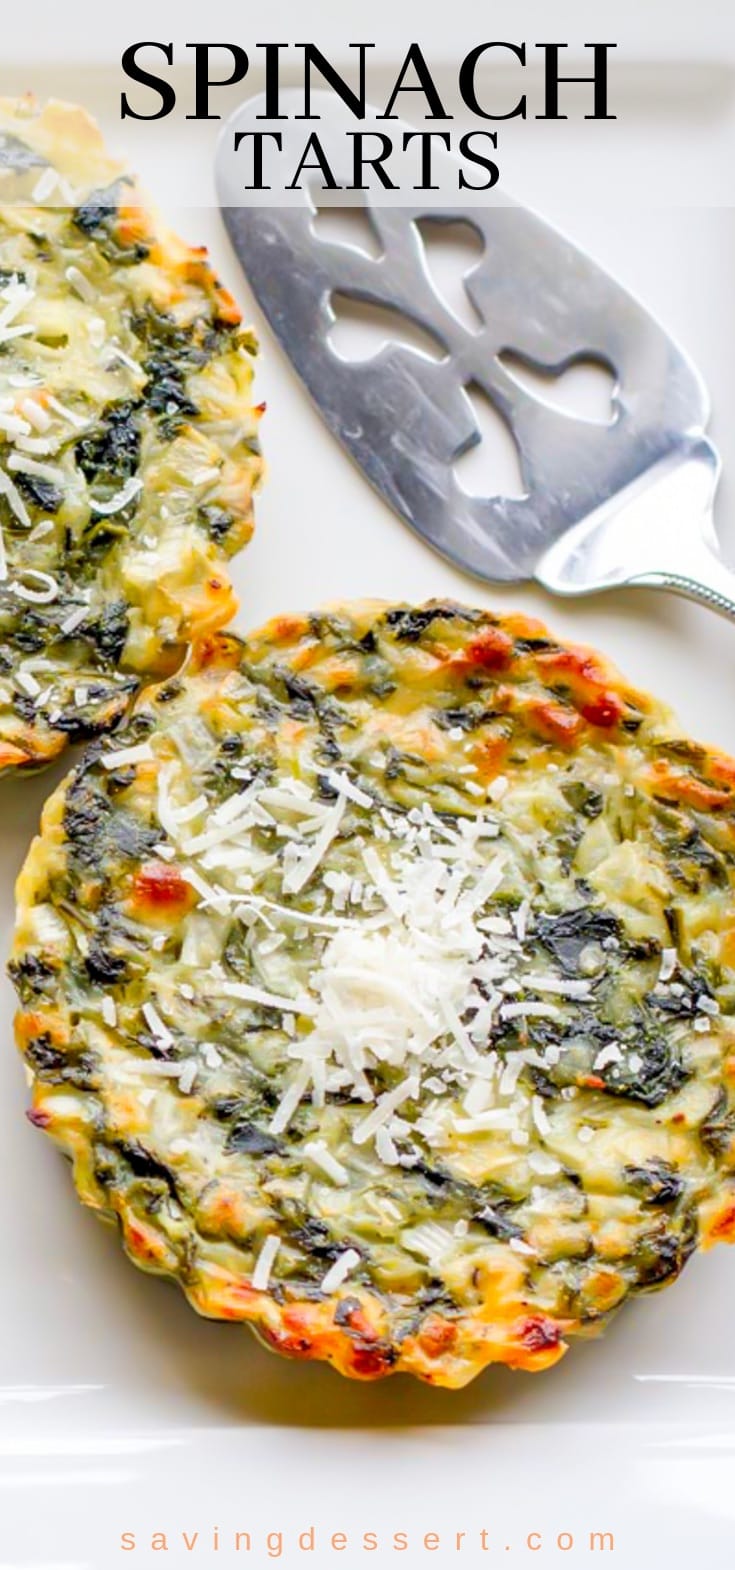 An authentic Irish recipe for crustless Spinach Tarts with plenty of flavor and a terrific texture. #irish #spinachtarts #savorytart #crustlesstart